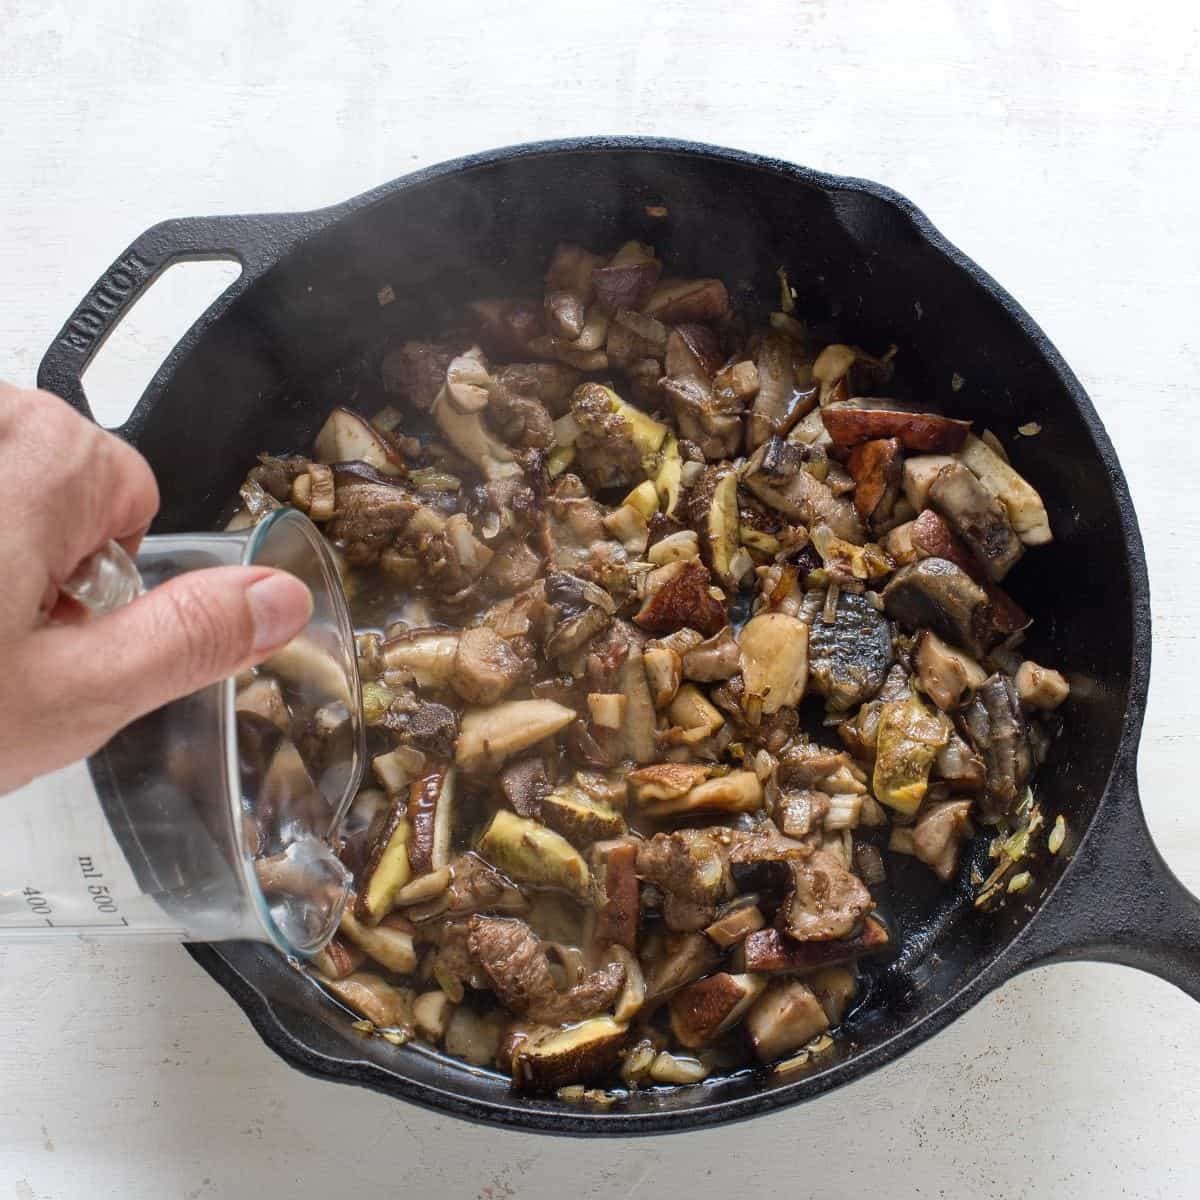 Pouring water to a skillet with sauteed mushrooms.